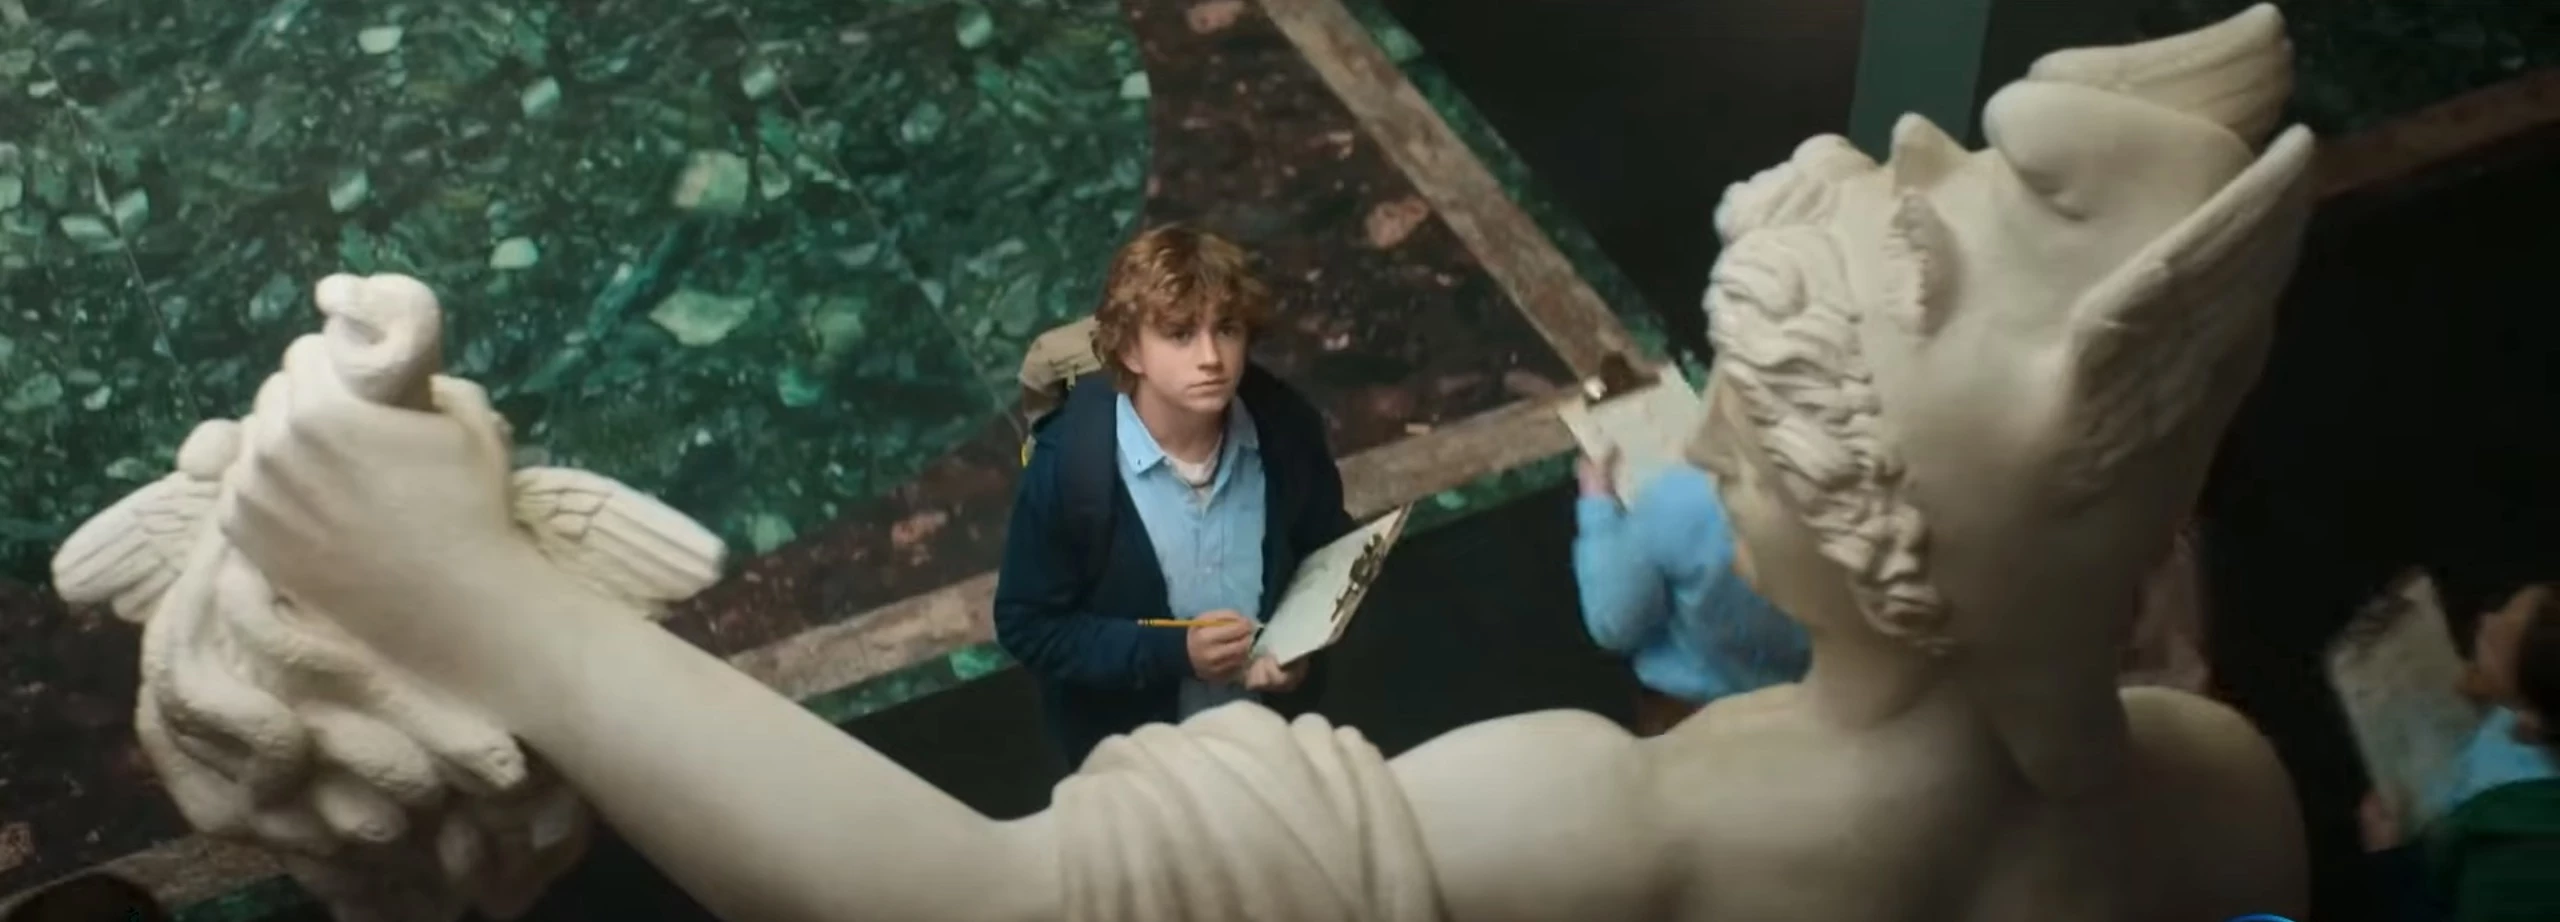 Percy Jackson and the Olympians Episode 5 recap